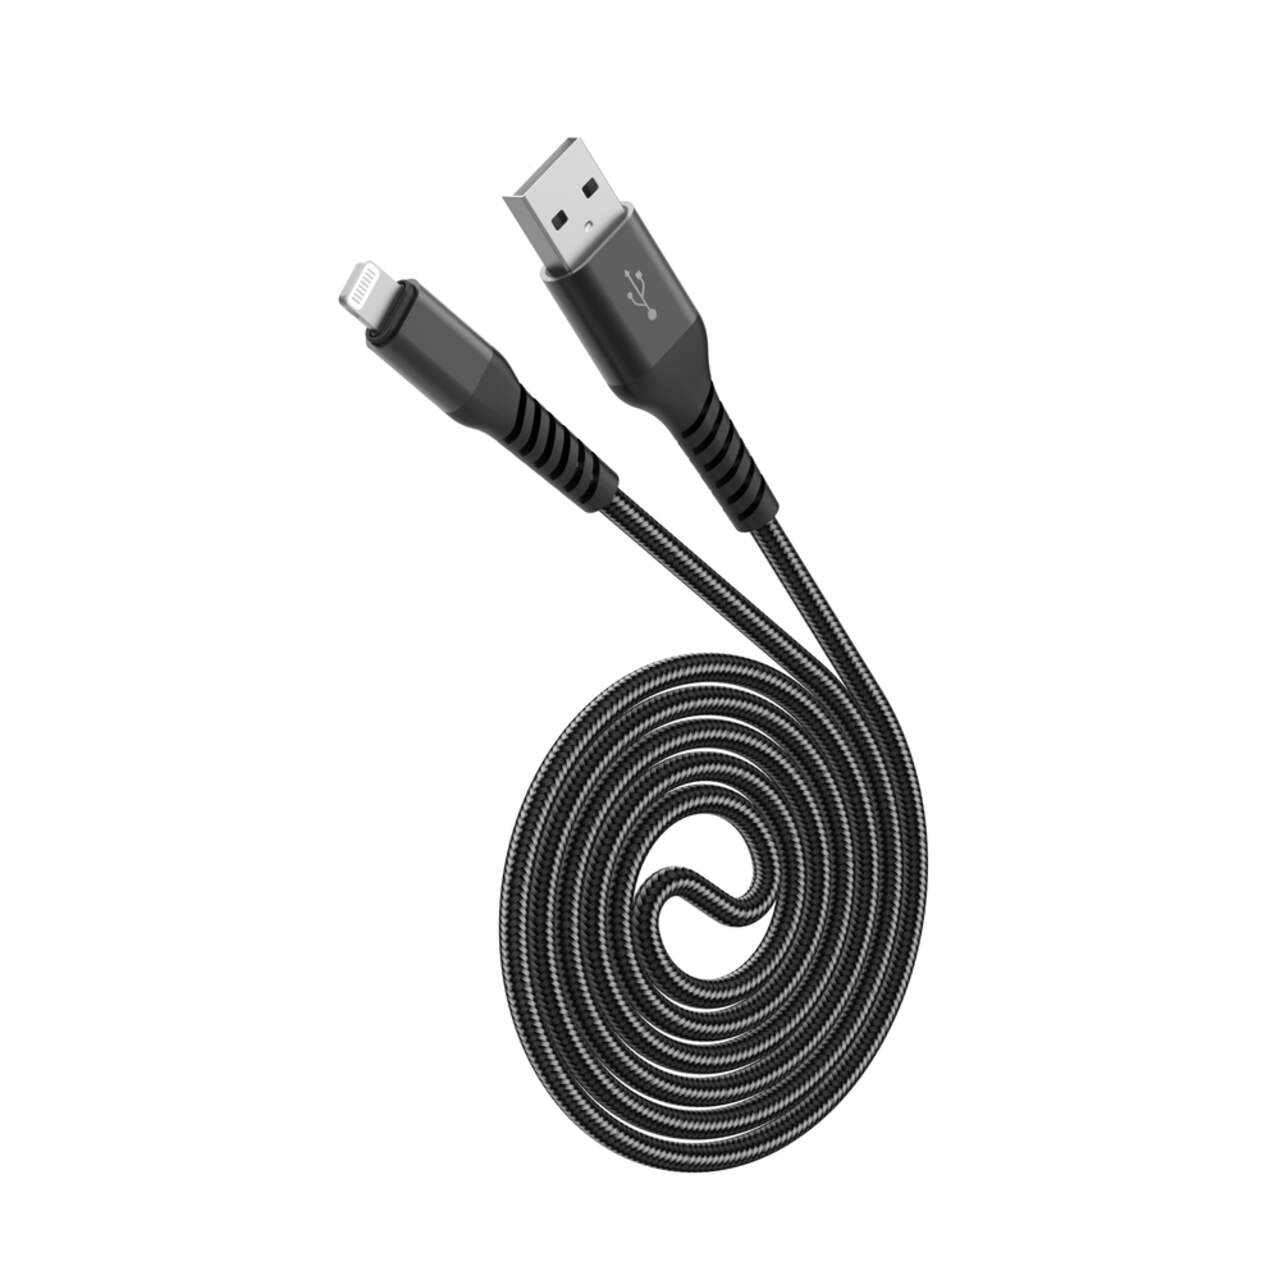 https://media-www.canadiantire.ca/product/automotive/car-care-accessories/auto-electronics/0355568/bluehive-durable-usb-a-to-lightning-cable-black-3ft-0867a38f-a5ec-4808-ae99-1554fc56a205.png?imdensity=1&imwidth=640&impolicy=mZoom